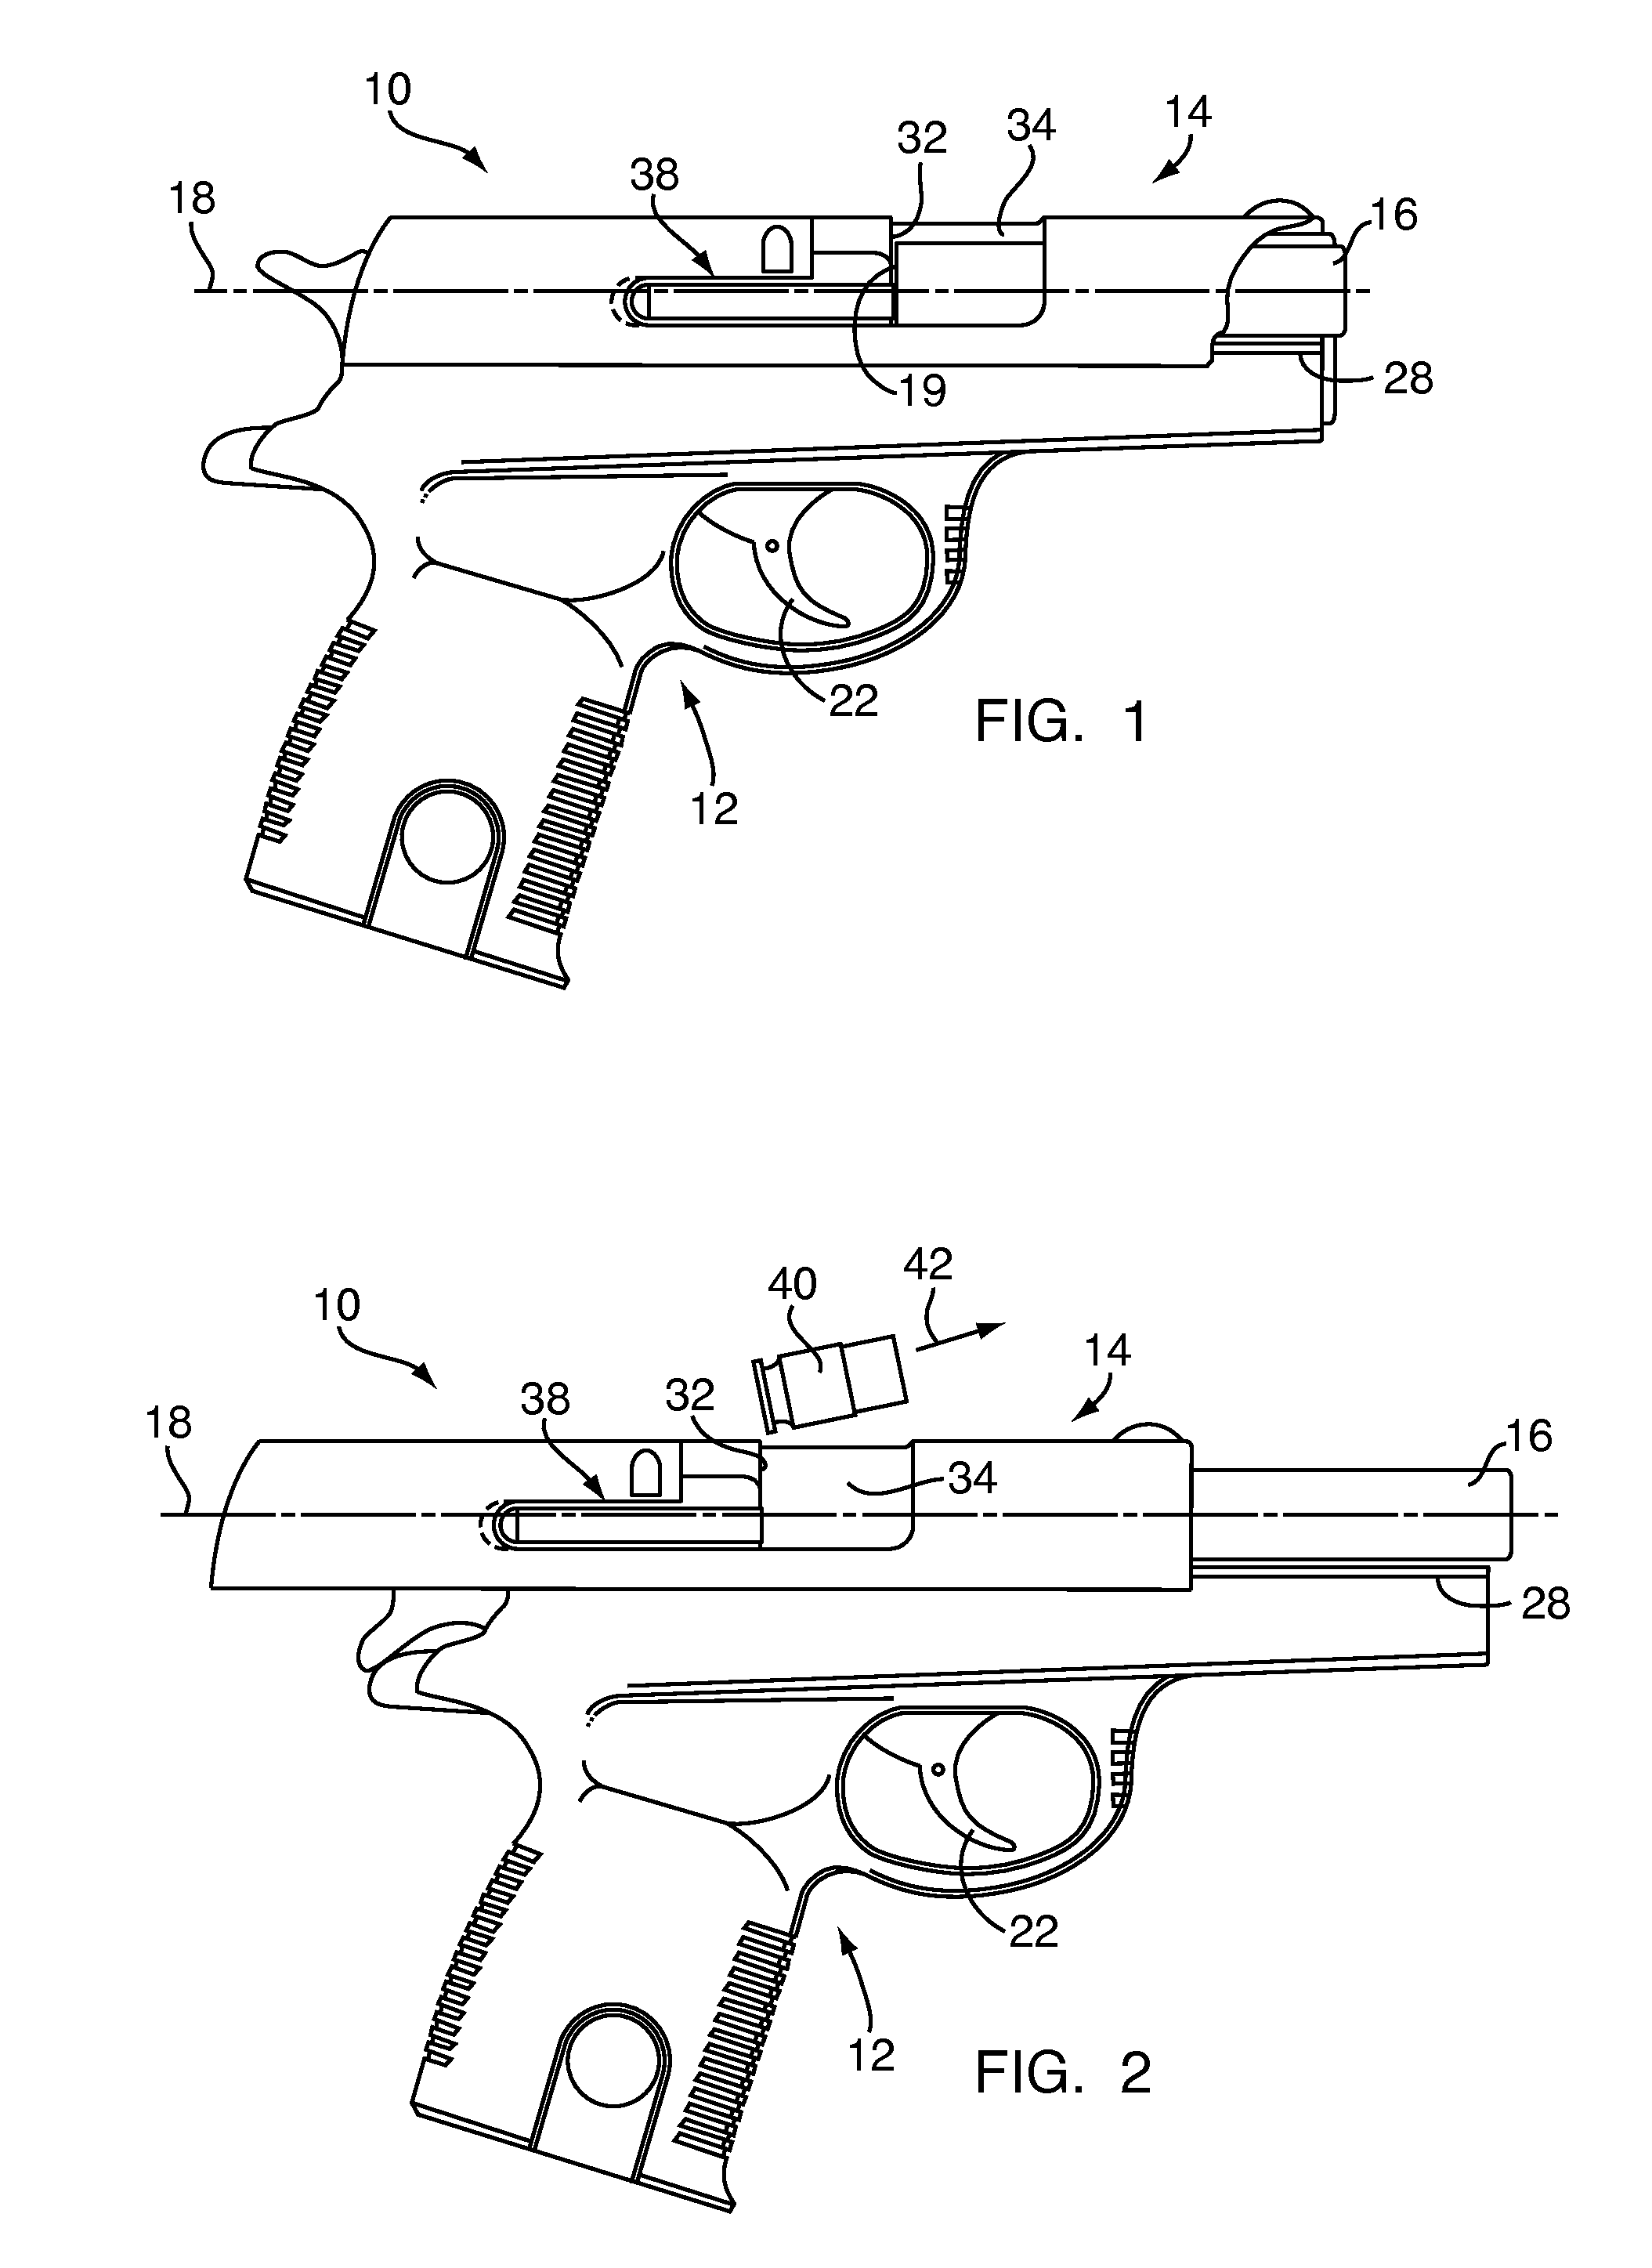 Rotating and translating extractor mechansim